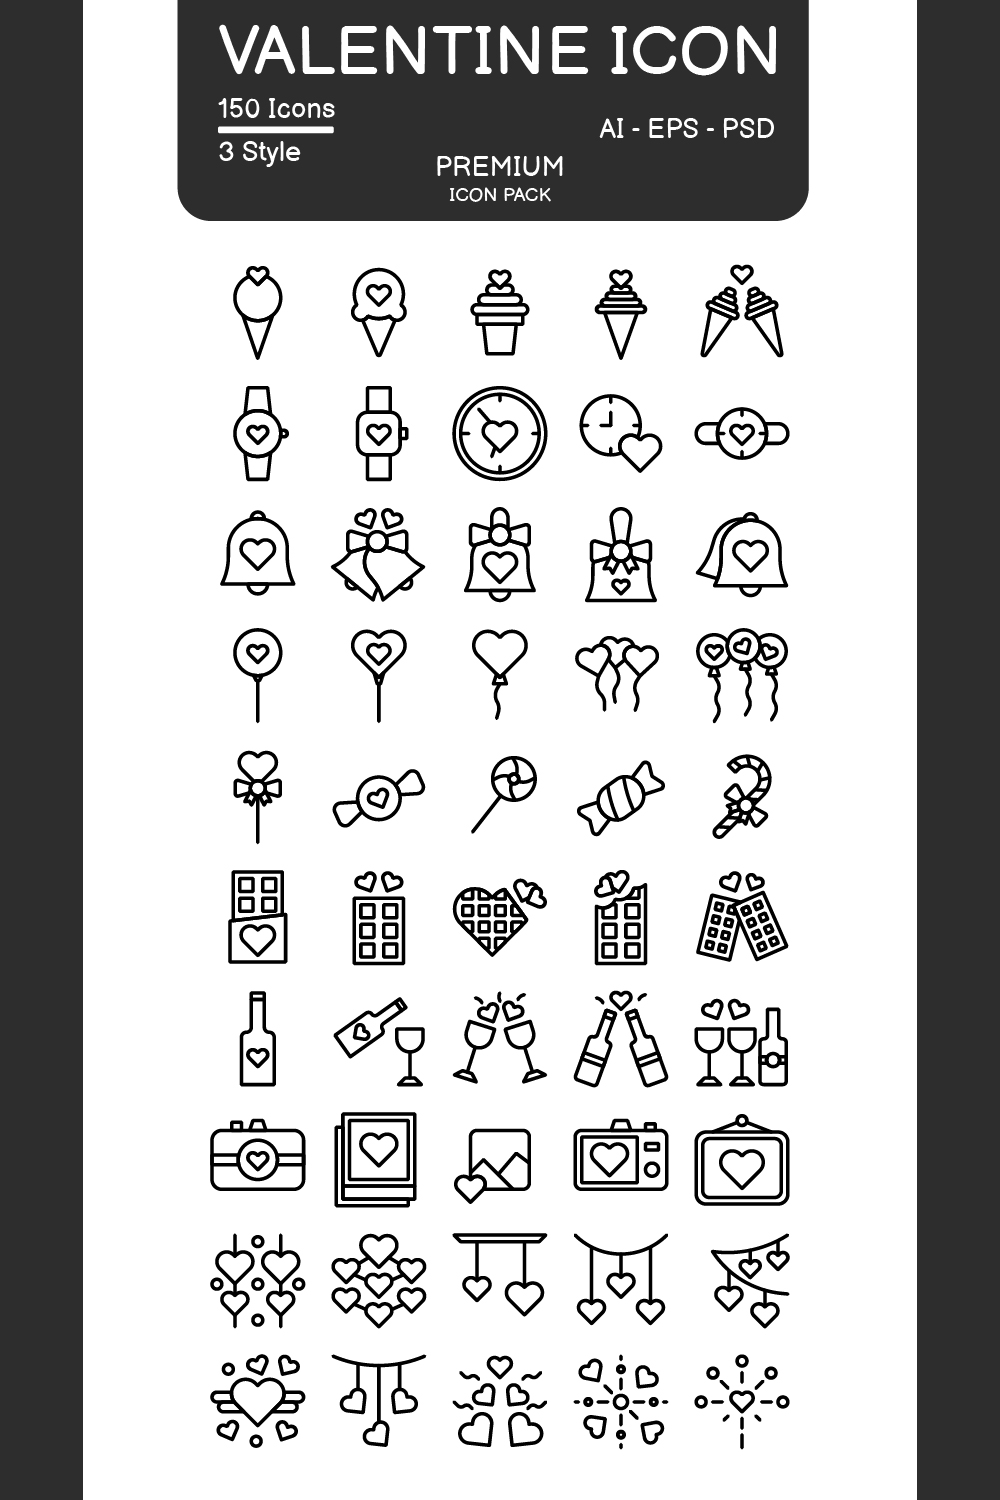 Valentine icon set 3 black style illustration vector element and symbol perfect. pinterest preview image.